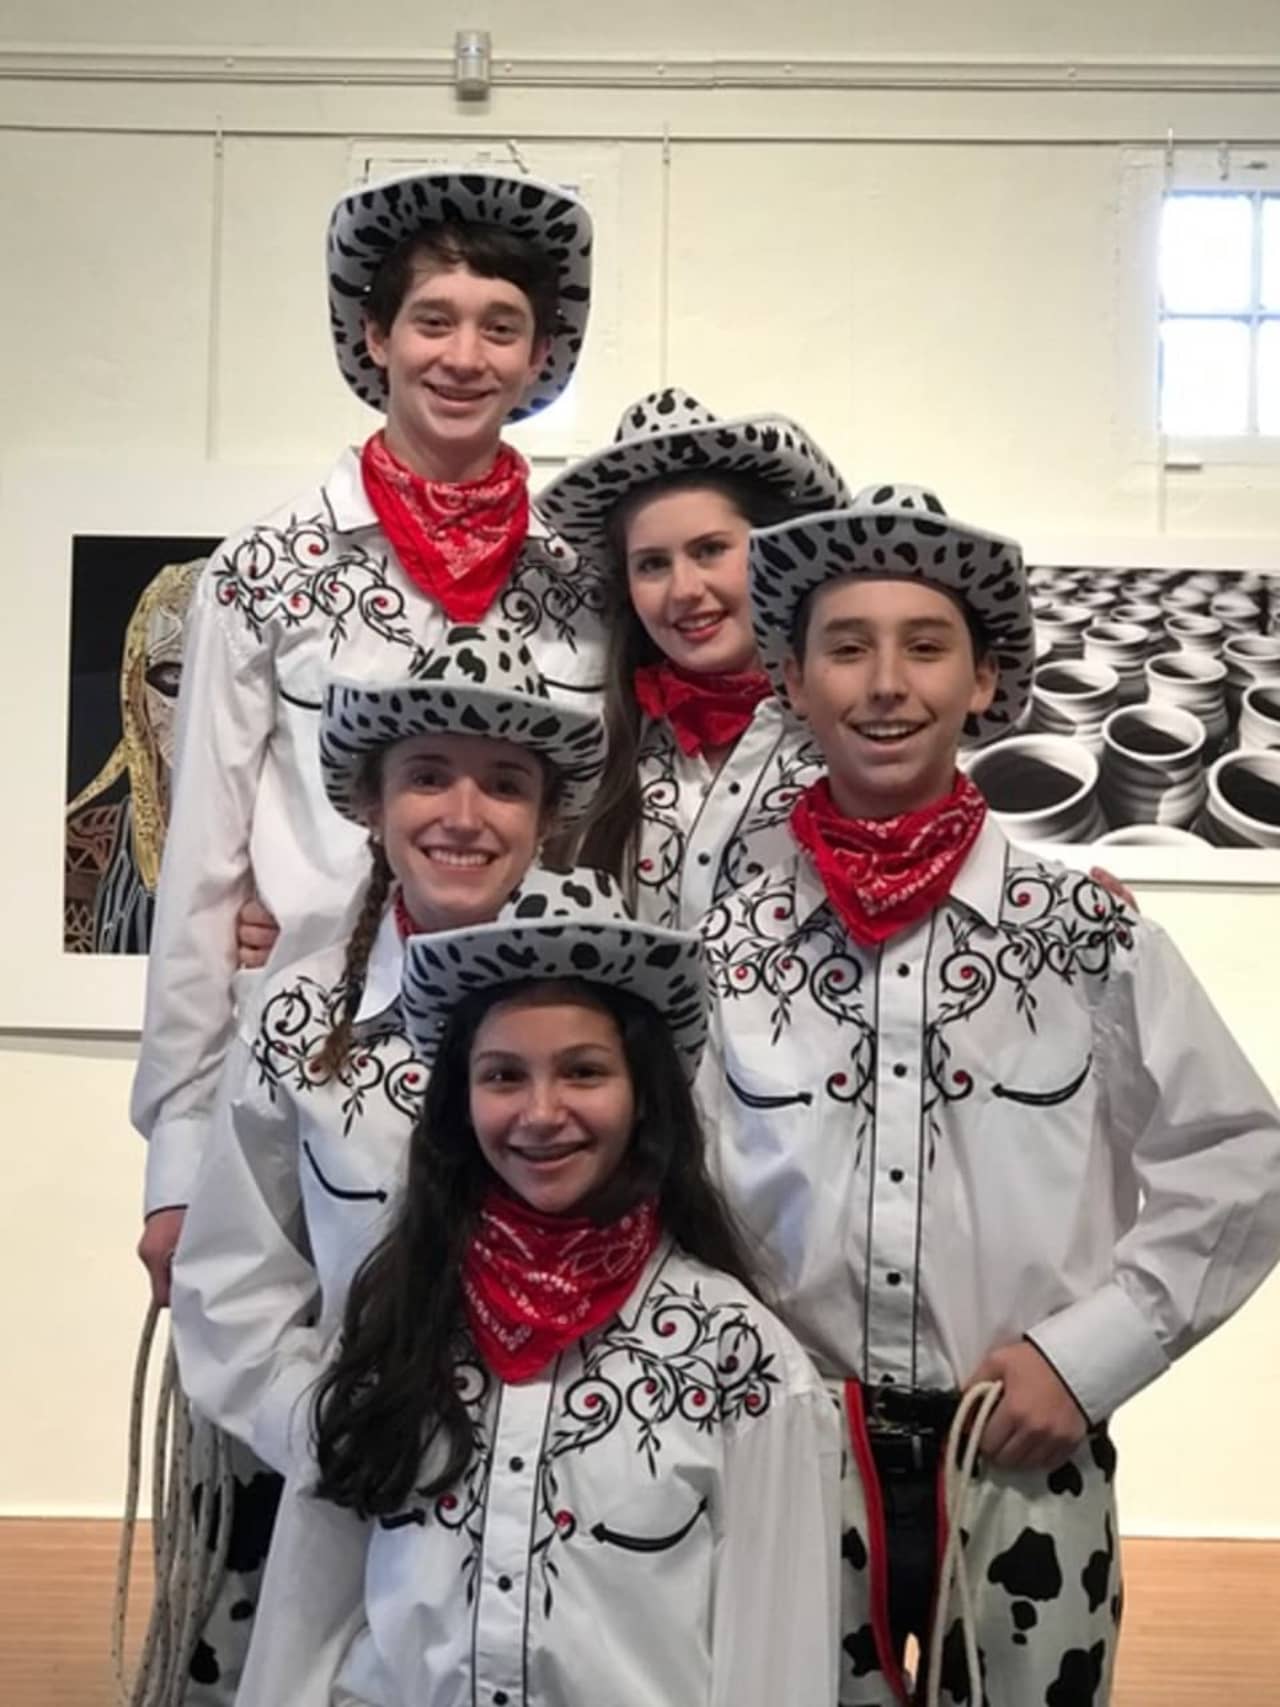 A legendary American cowboy will come to life in "The Will Rogers Follies, A Life in Revue" Friday and Saturday at Trumbull High School. Cast members include Joseph Turner, Allison Demers, Melissa Beck, Luke Pelli, and Theresa Ollveira.